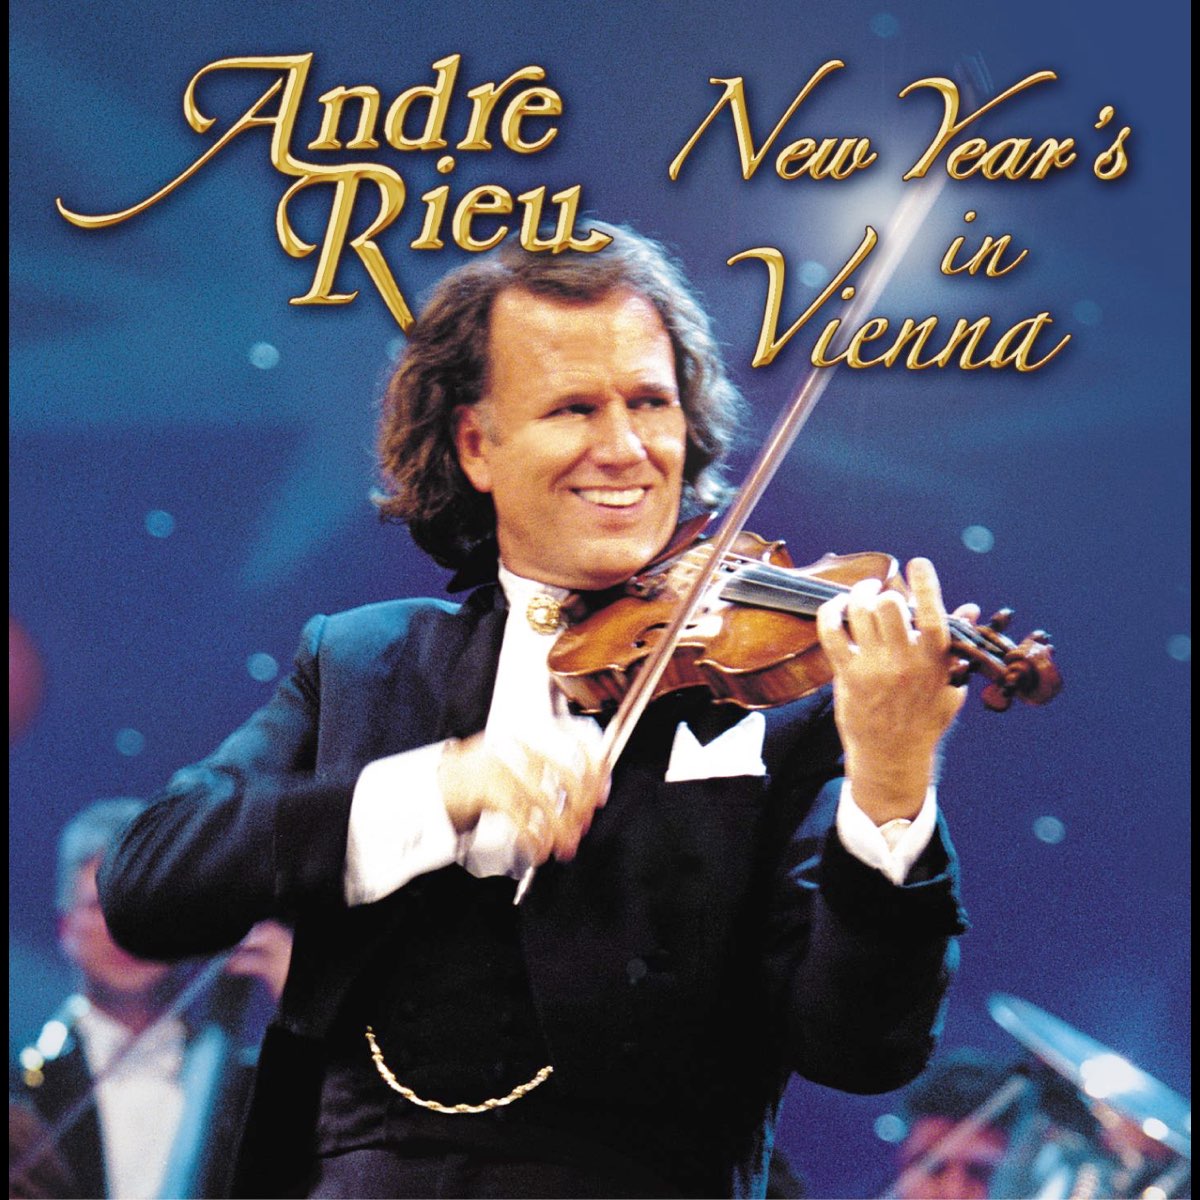 New Year's in Vienna (Live) - Album by André Rieu & Johann Strauss  Orchestra - Apple Music